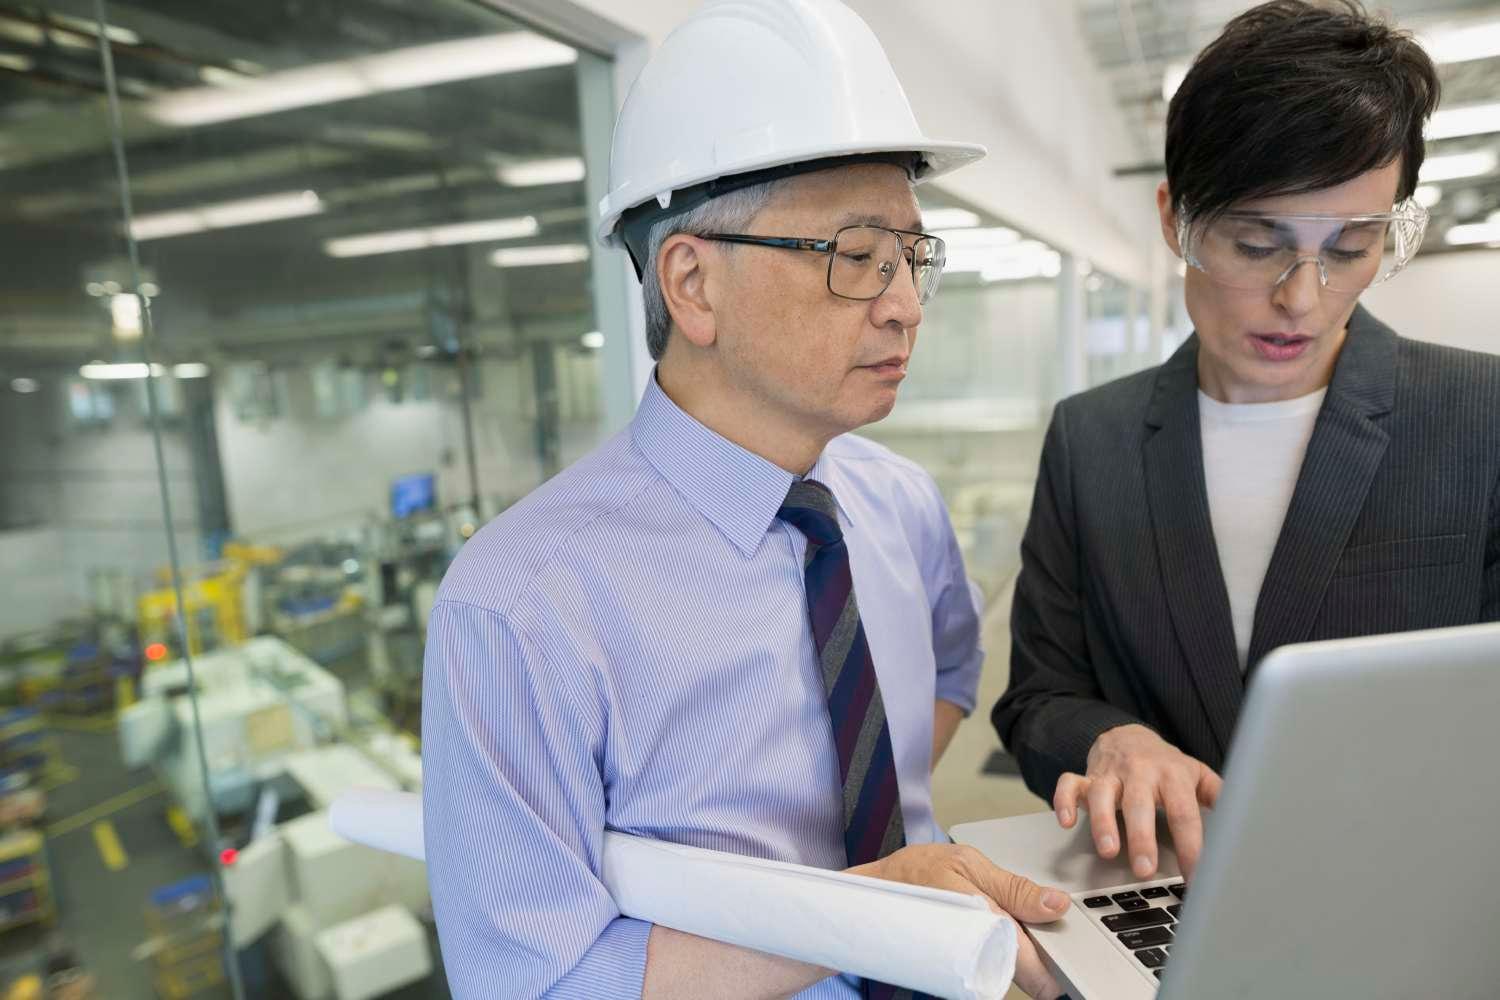 Woman with safety glasses and man wearing a hard hat look at computer in factory hall